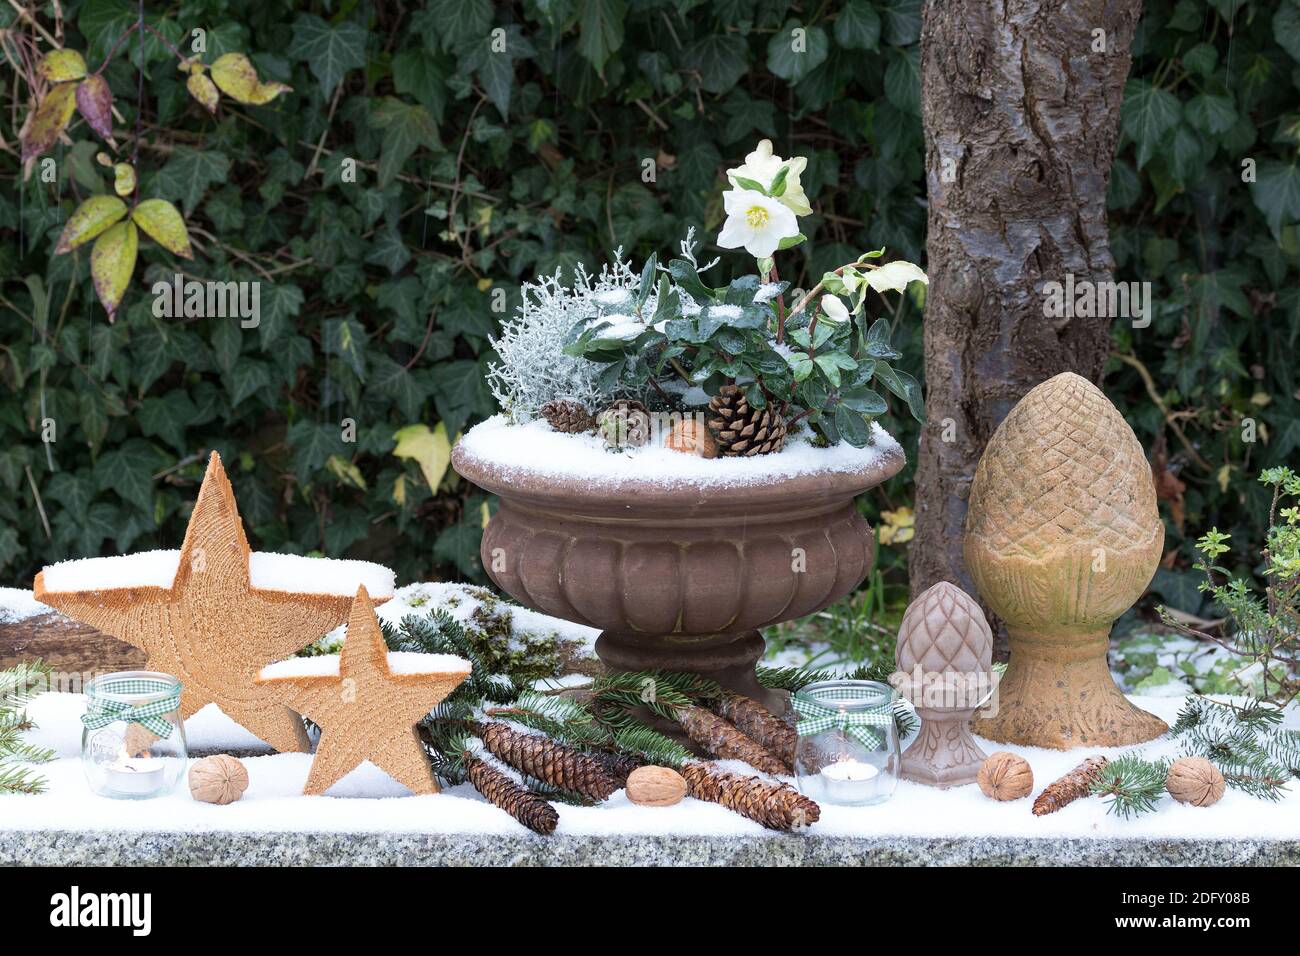 winter garden decoration with helleborus niger in plant vase and wooden stars Stock Photo